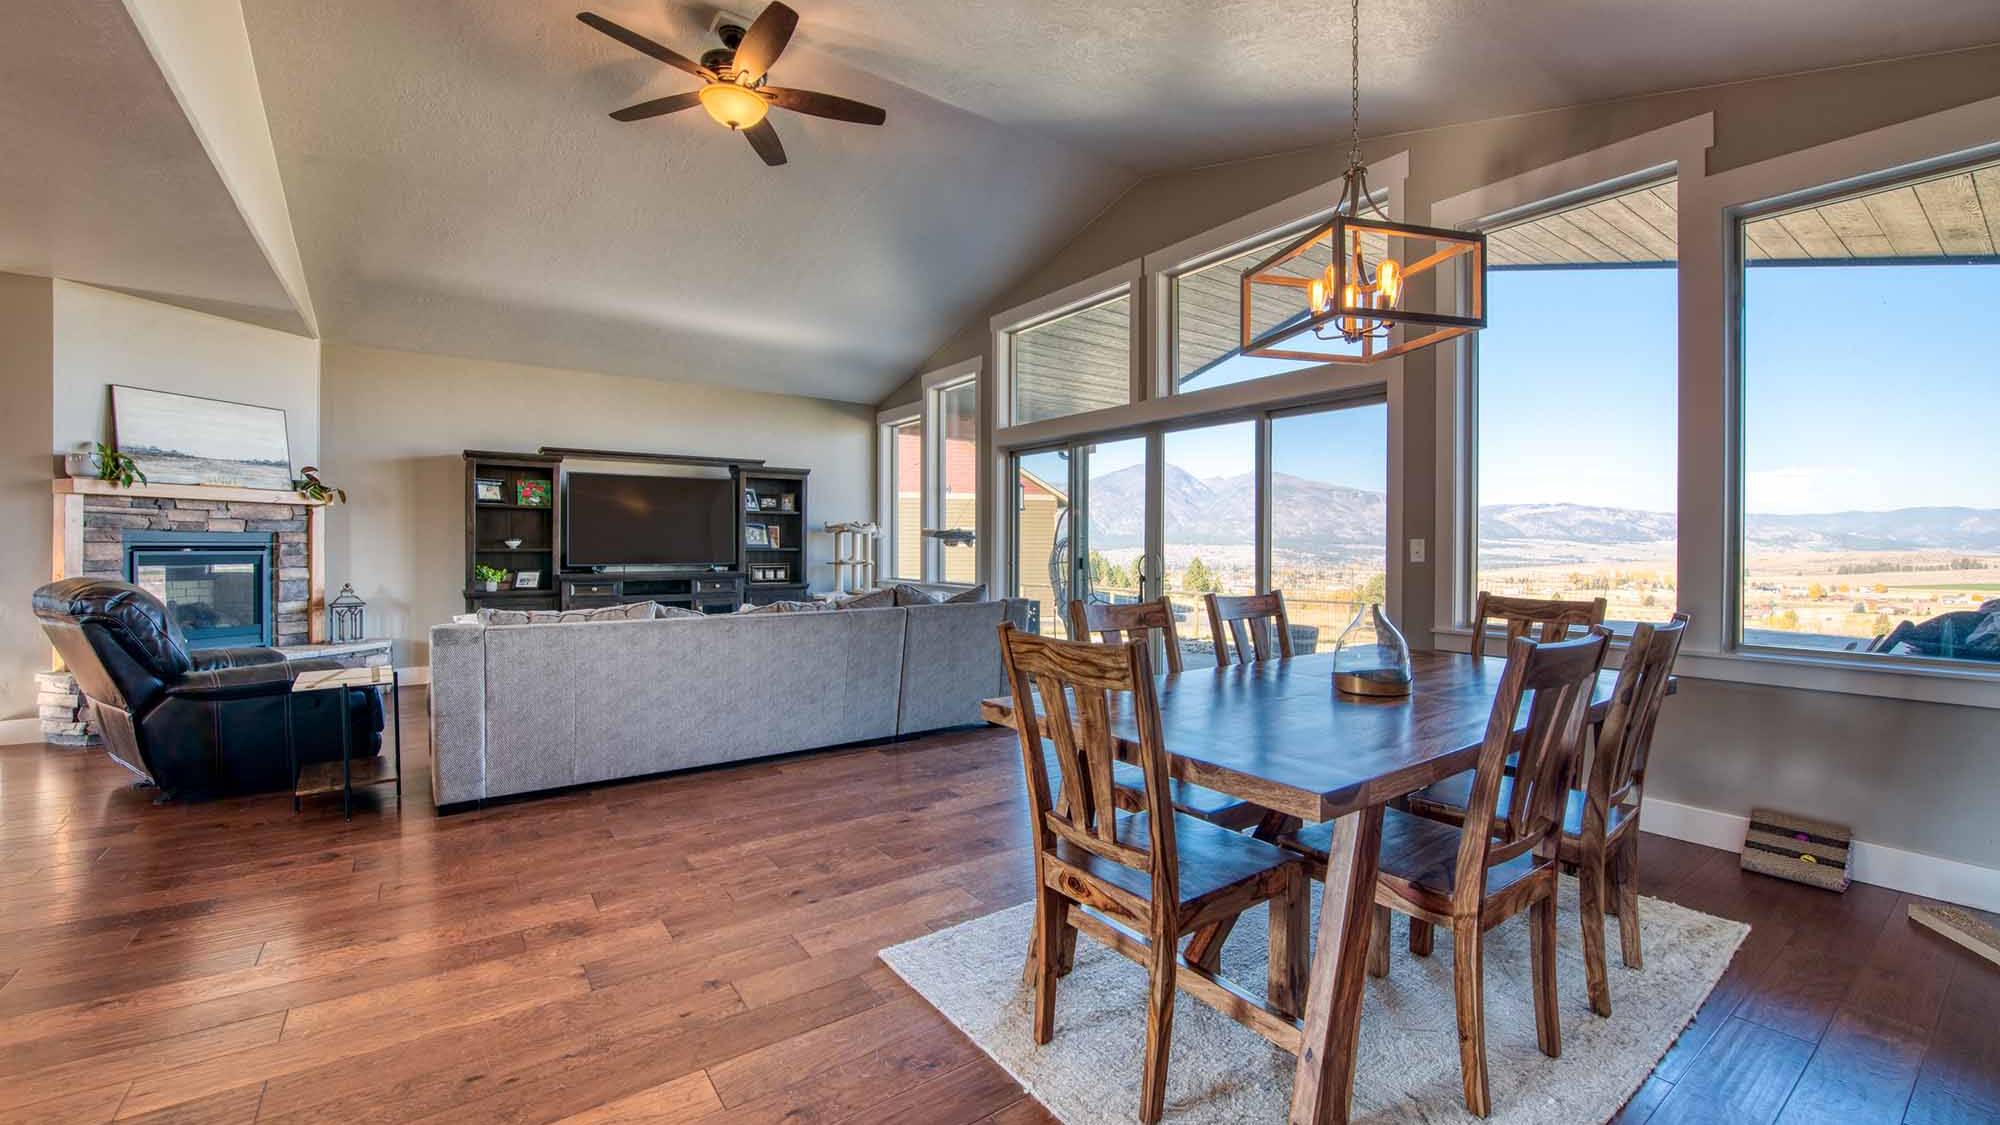 Dining area & living room with vaulted ceiling and wood floors in The Copper Creek model home - Built by Big Sky Builder in Florence, MT